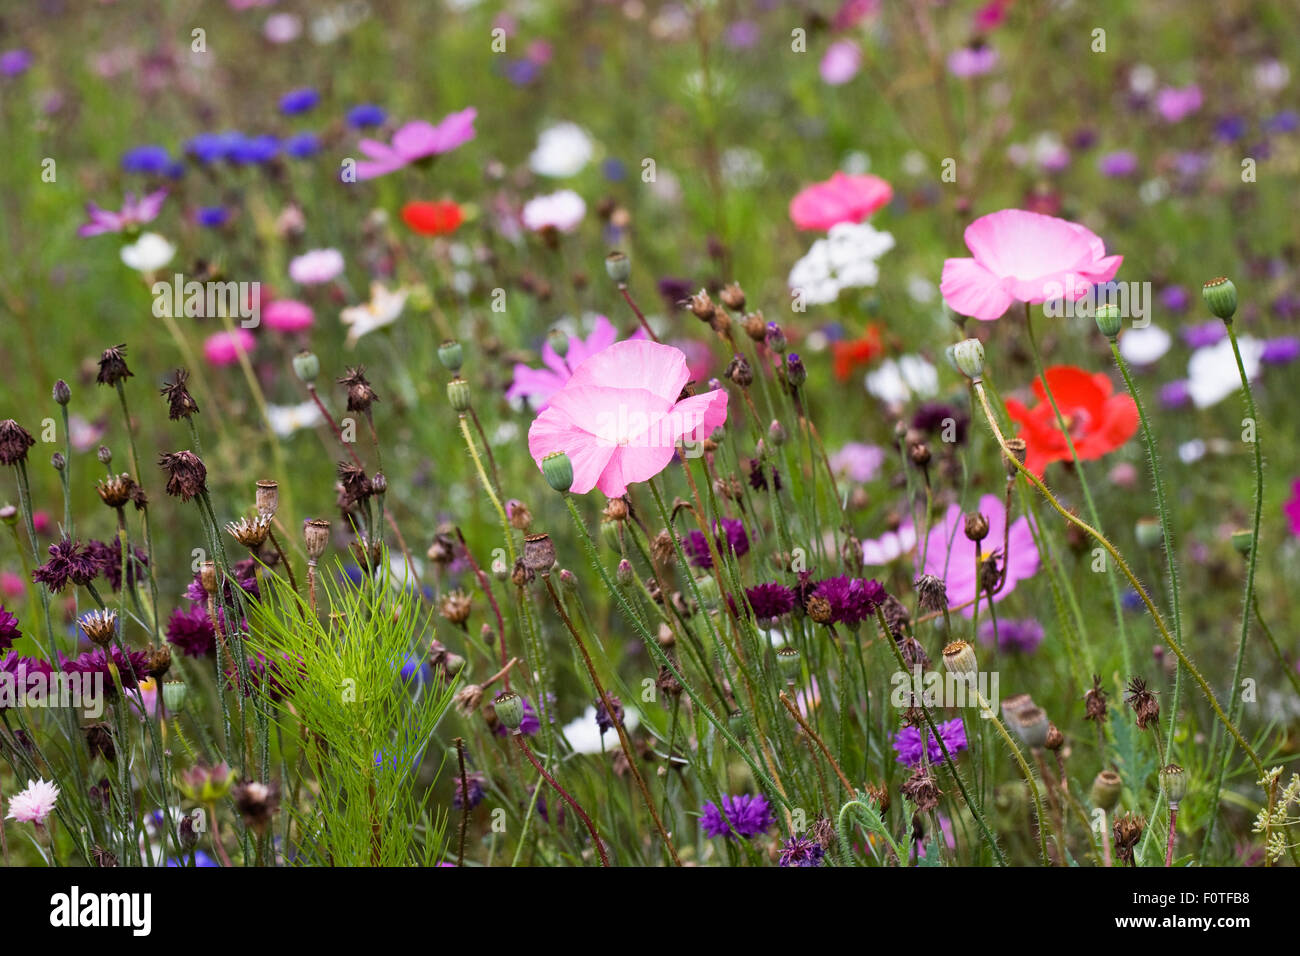 Mixed flower meadow at the end of Summer. Stock Photo